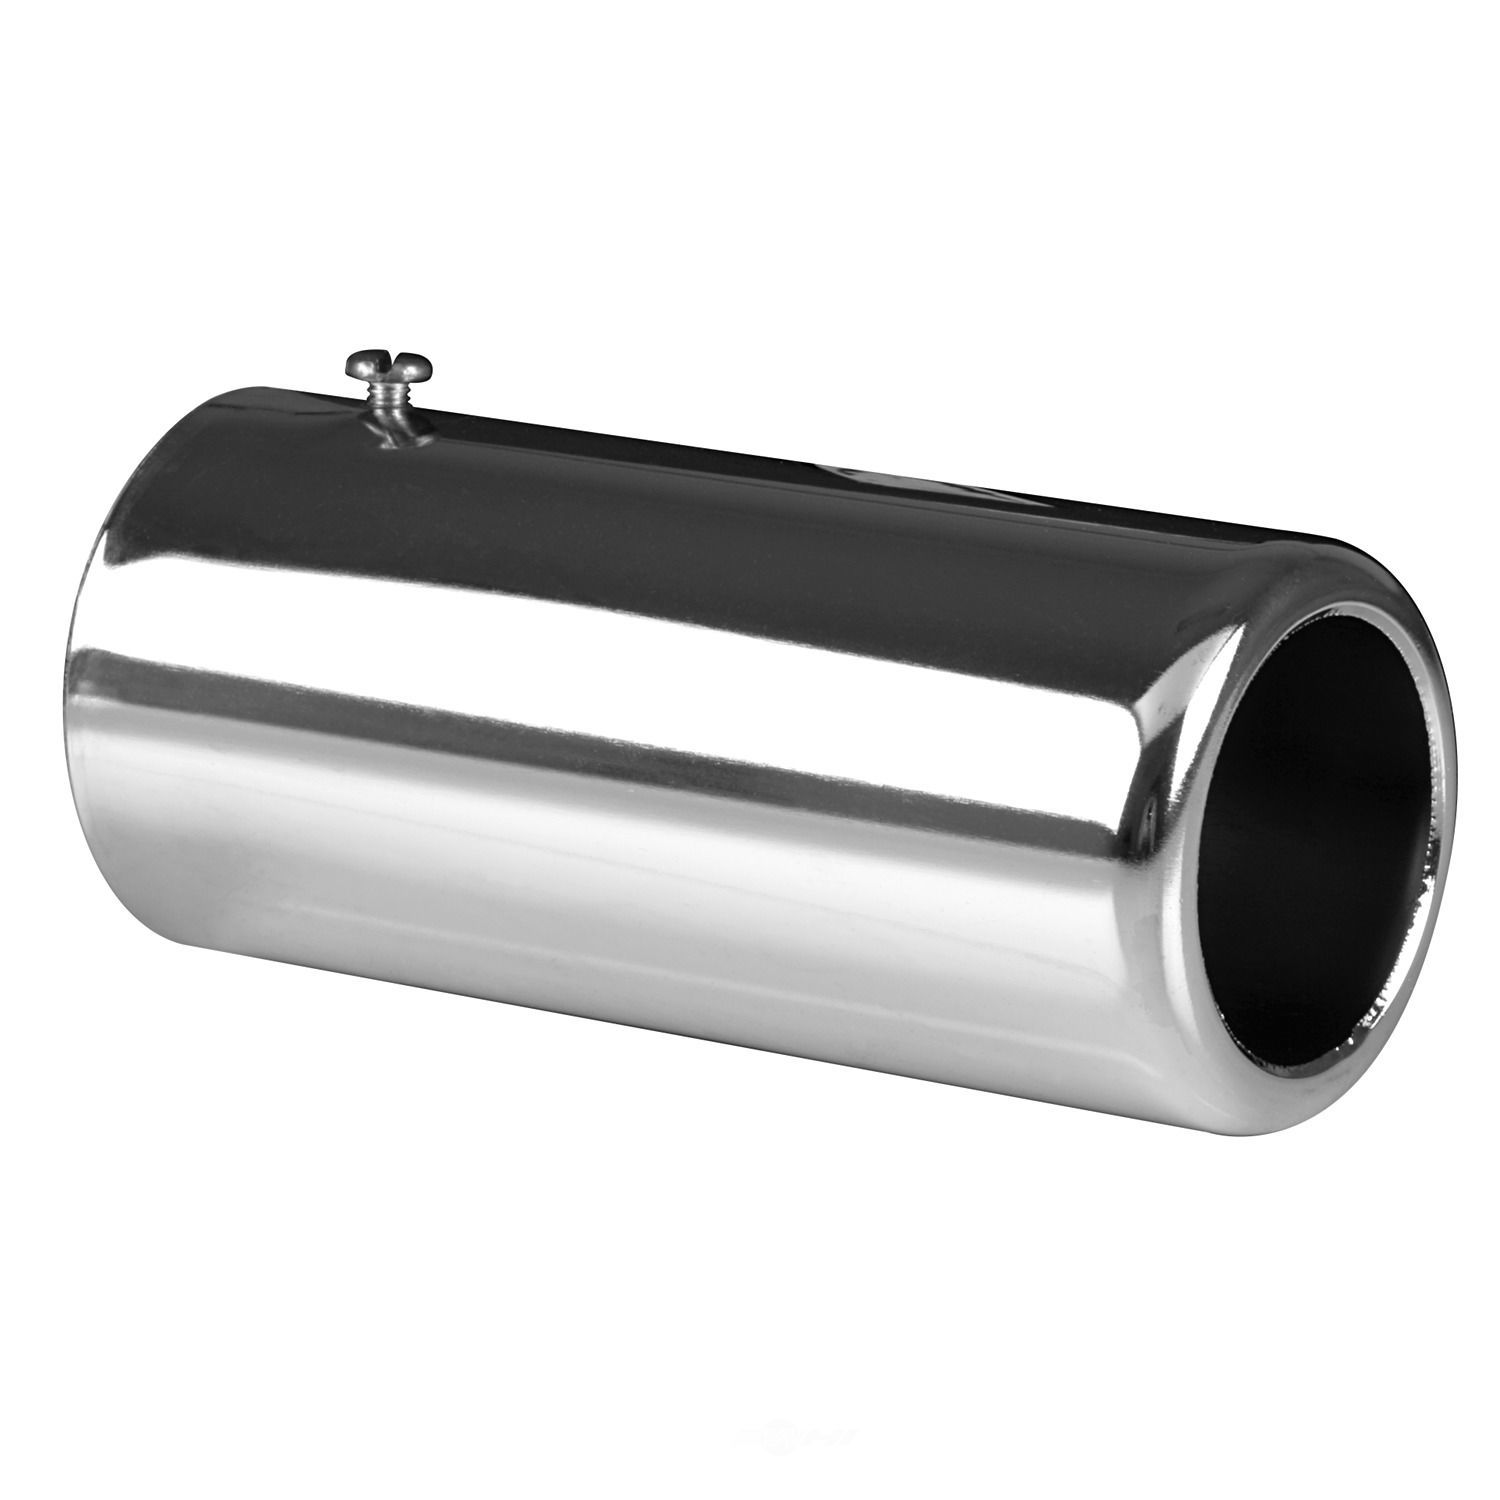 AP EXHAUST W/FEDERAL CONVERTER - Exhaust Tail Pipe Tip - APF 9822